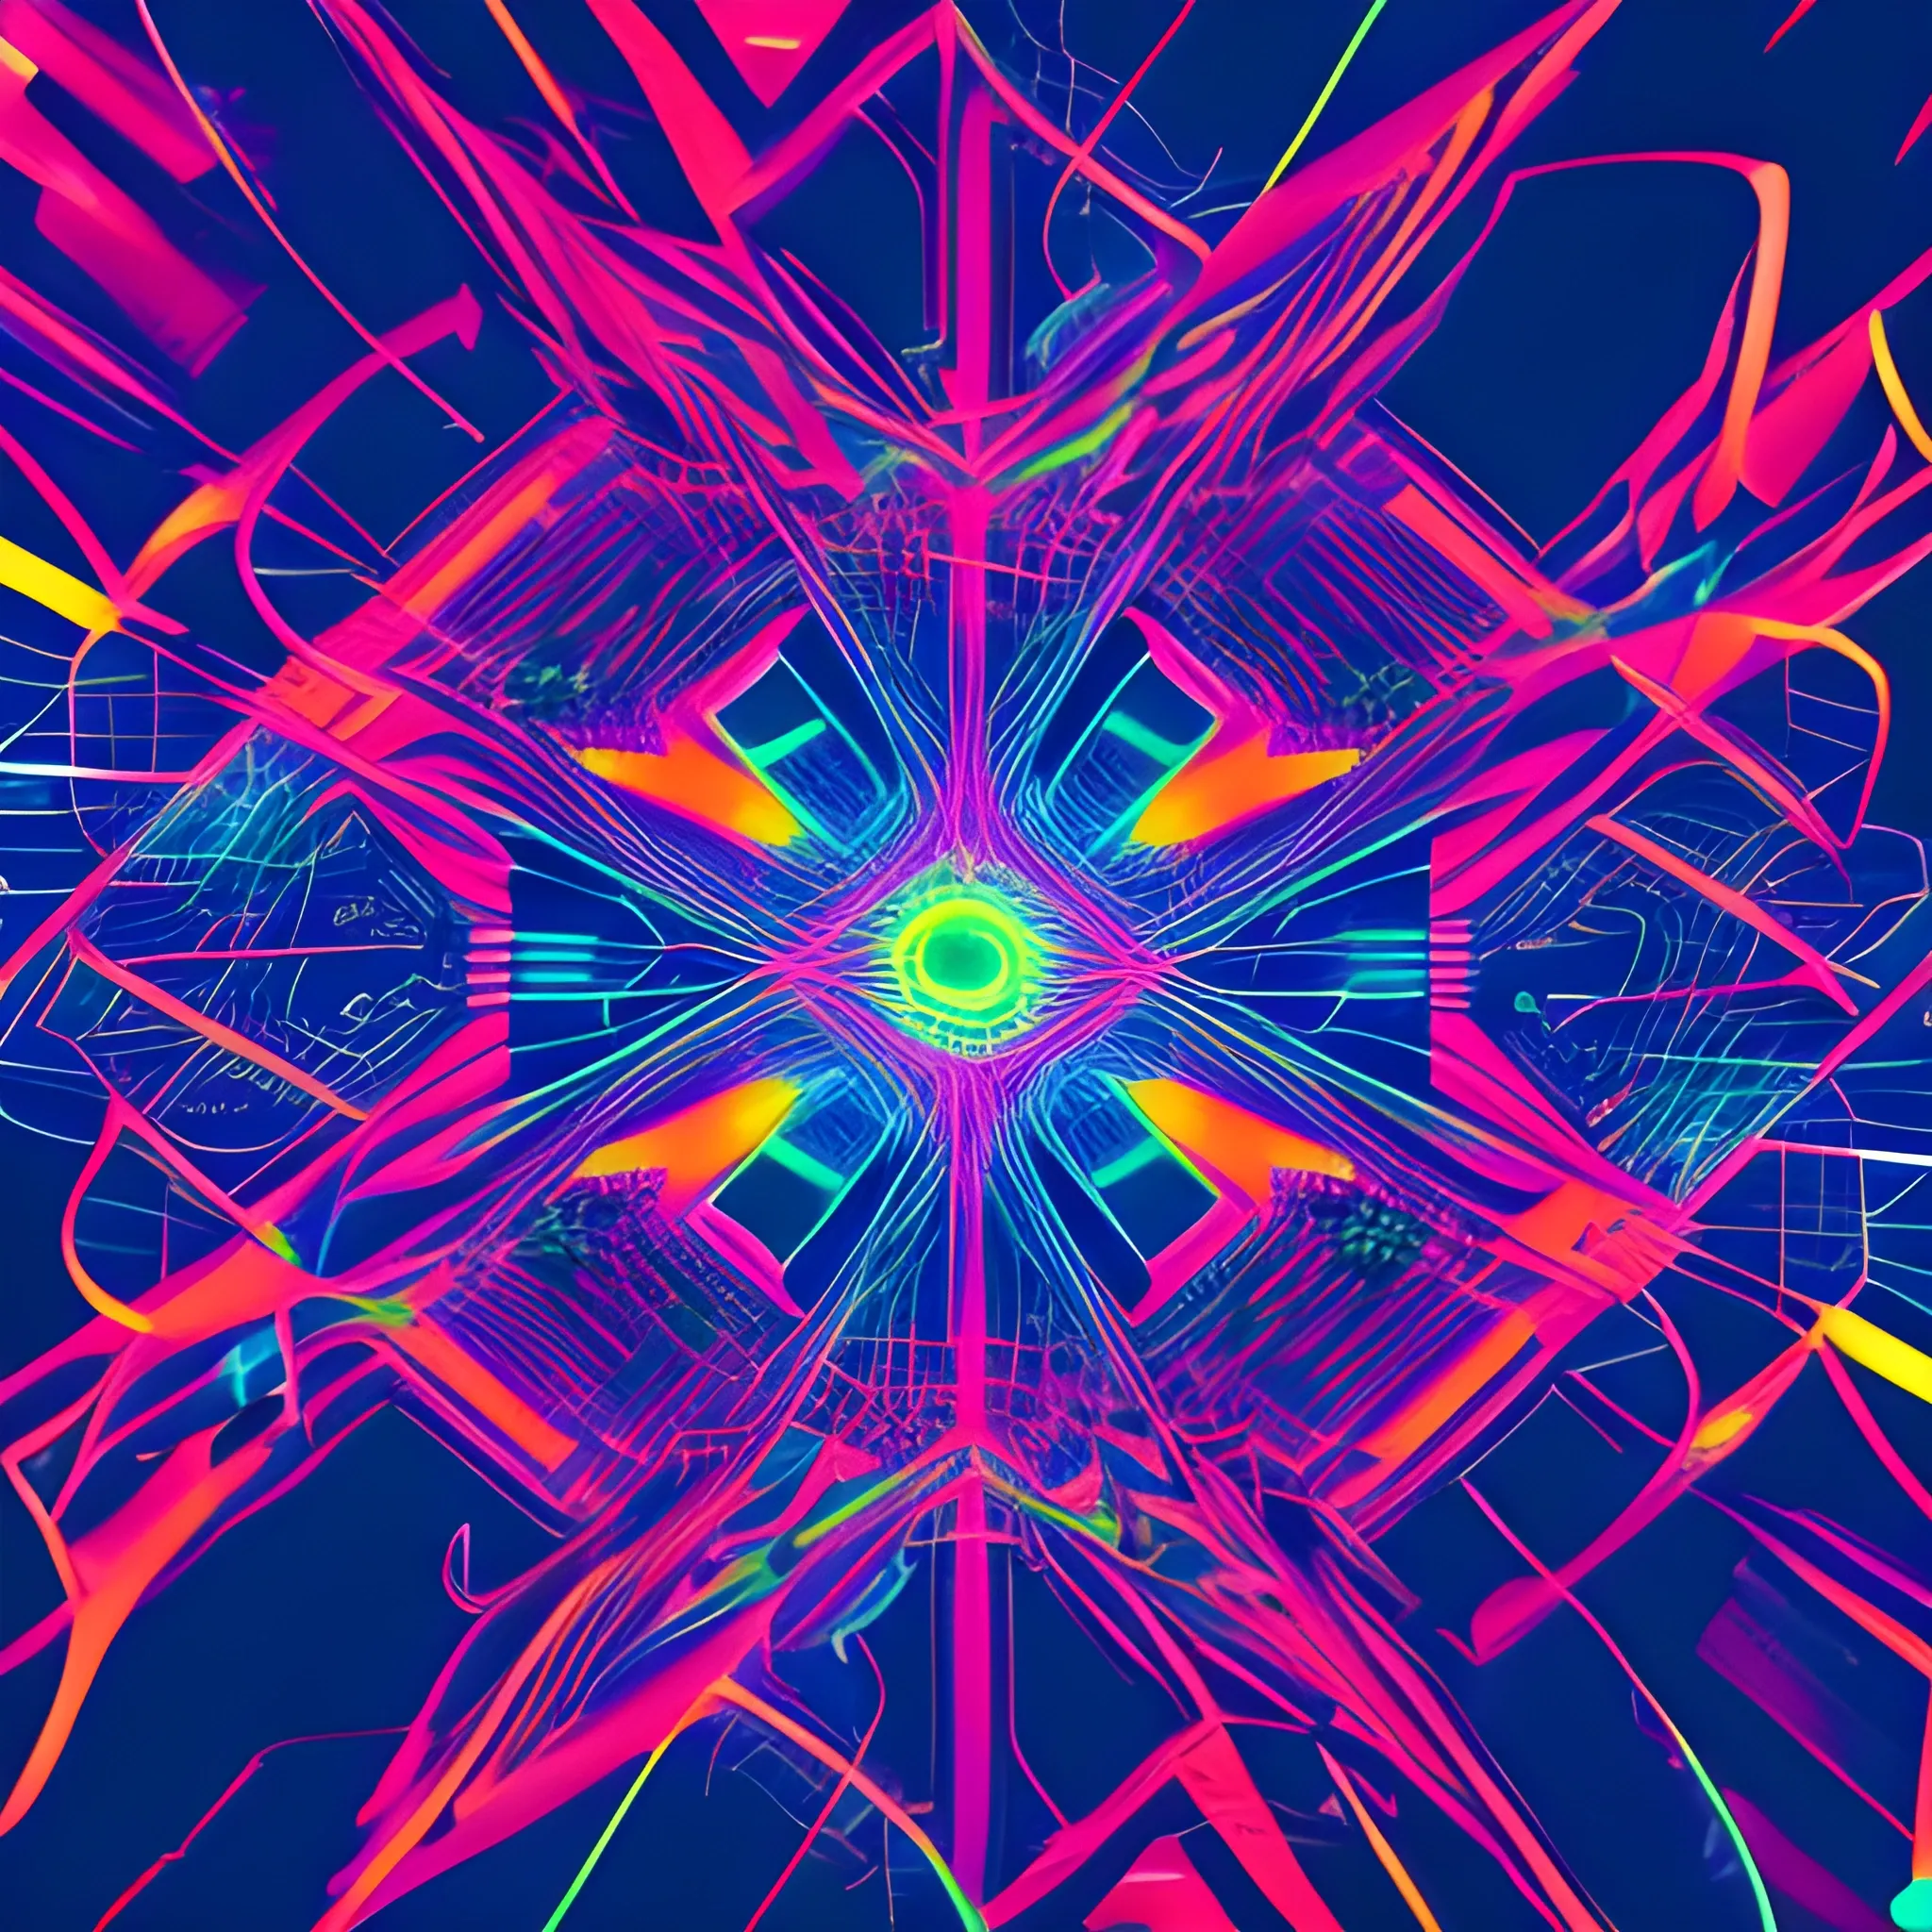 abstract, maximum resolution, high quality, web
, Trippy, neon, techno
